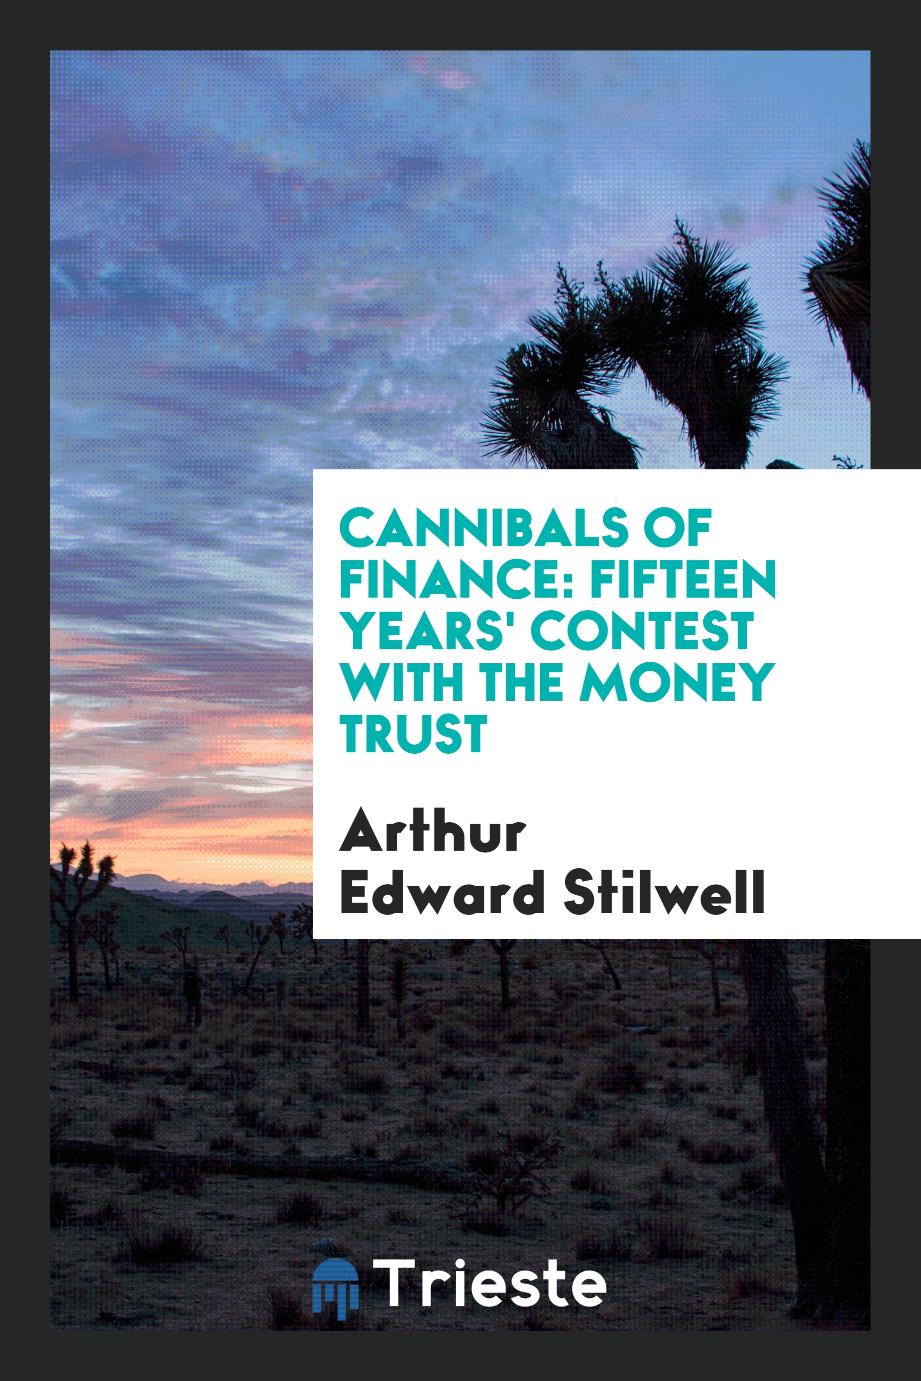 Cannibals of Finance: Fifteen Years' Contest with the Money Trust